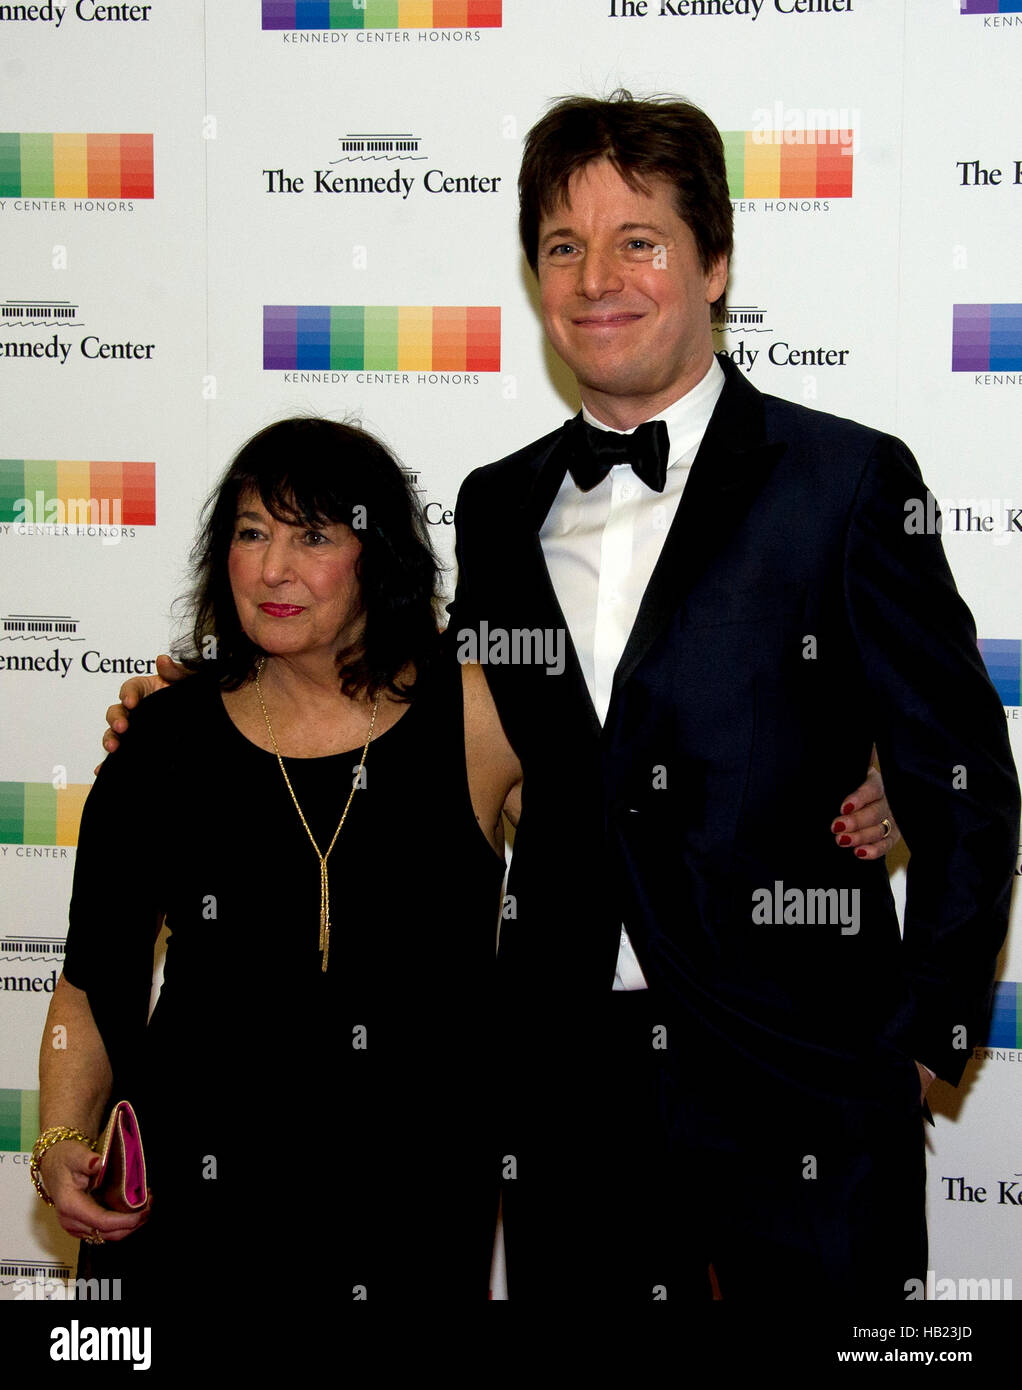 Washington DC, USA. 3rd Dec, 2016. Violinist Joshua Bell and his mother, Shirley, arrive for the formal Artist's Dinner honoring the recipients of the 39th Annual Kennedy Center Honors hosted by United States Secretary of State John F. Kerry at the U.S. Department of State in Washington, DC on Saturday, December 3, 2016. The 2016 honorees are: Argentine pianist Martha Argerich; rock band the Eagles; screen and stage actor Al Pacino; gospel and blues singer Mavis Staples; and musician James Taylor. Credit:  MediaPunch Inc/Alamy Live News Stock Photo